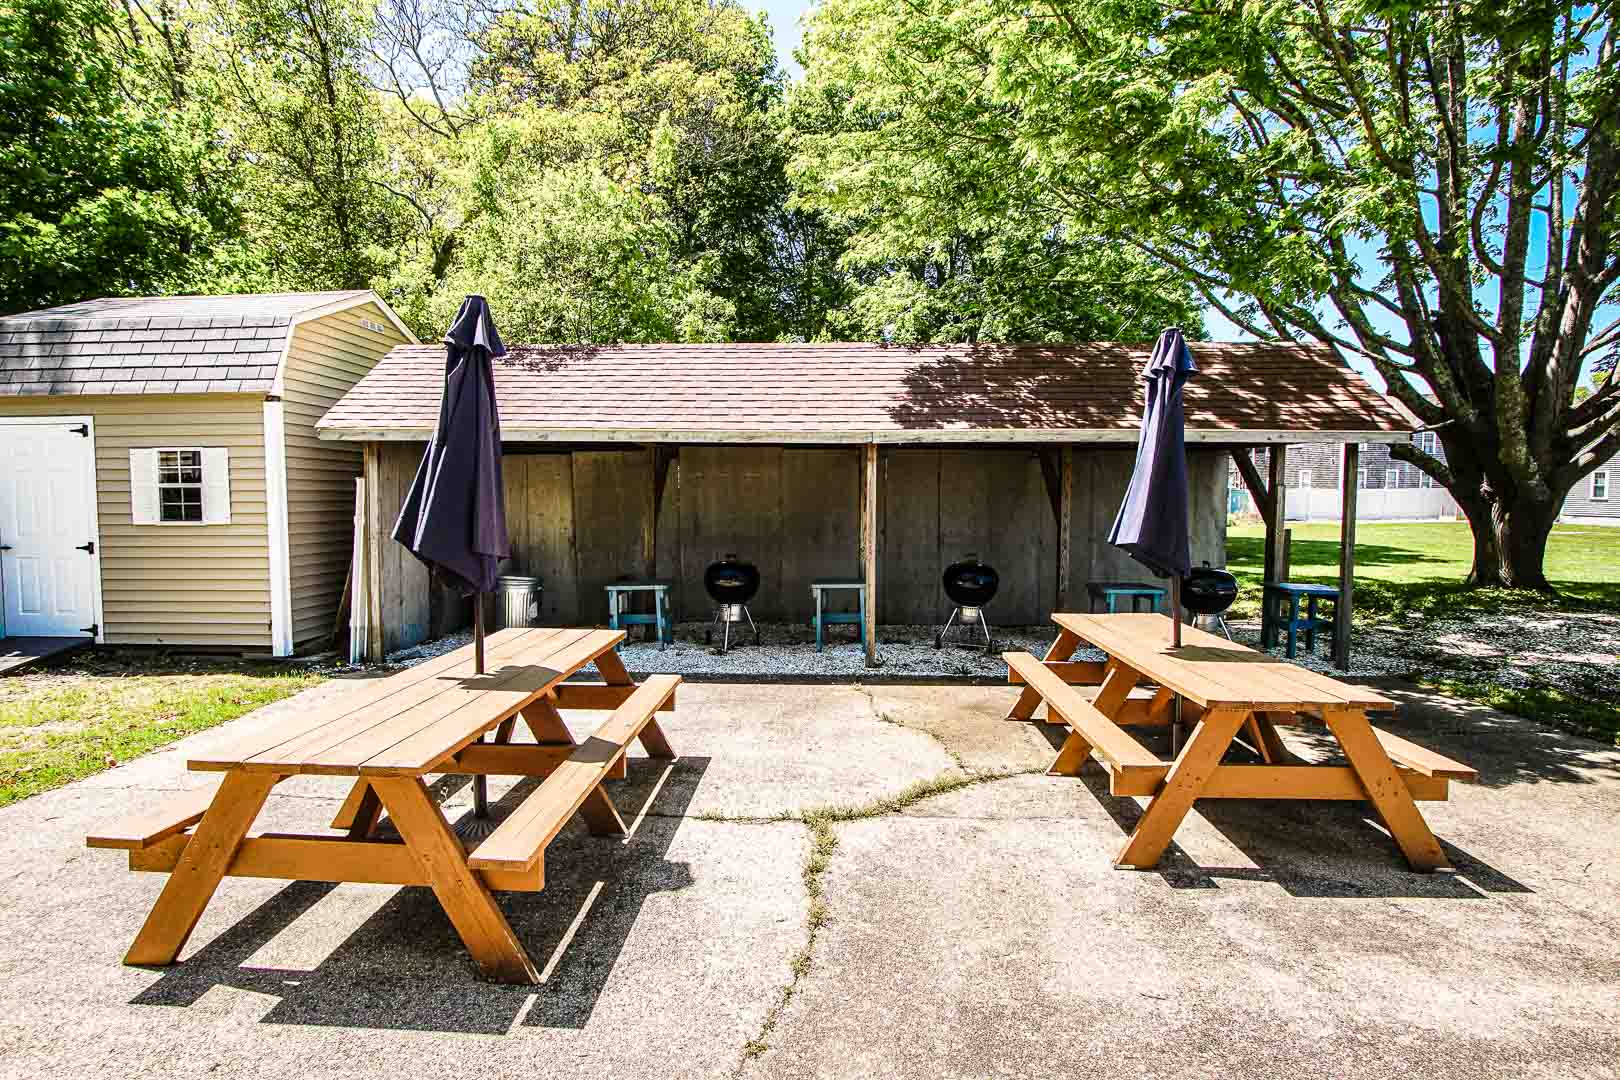 A tranquil picnic area at VRI's Cape Winds Resort in Massachusetts.